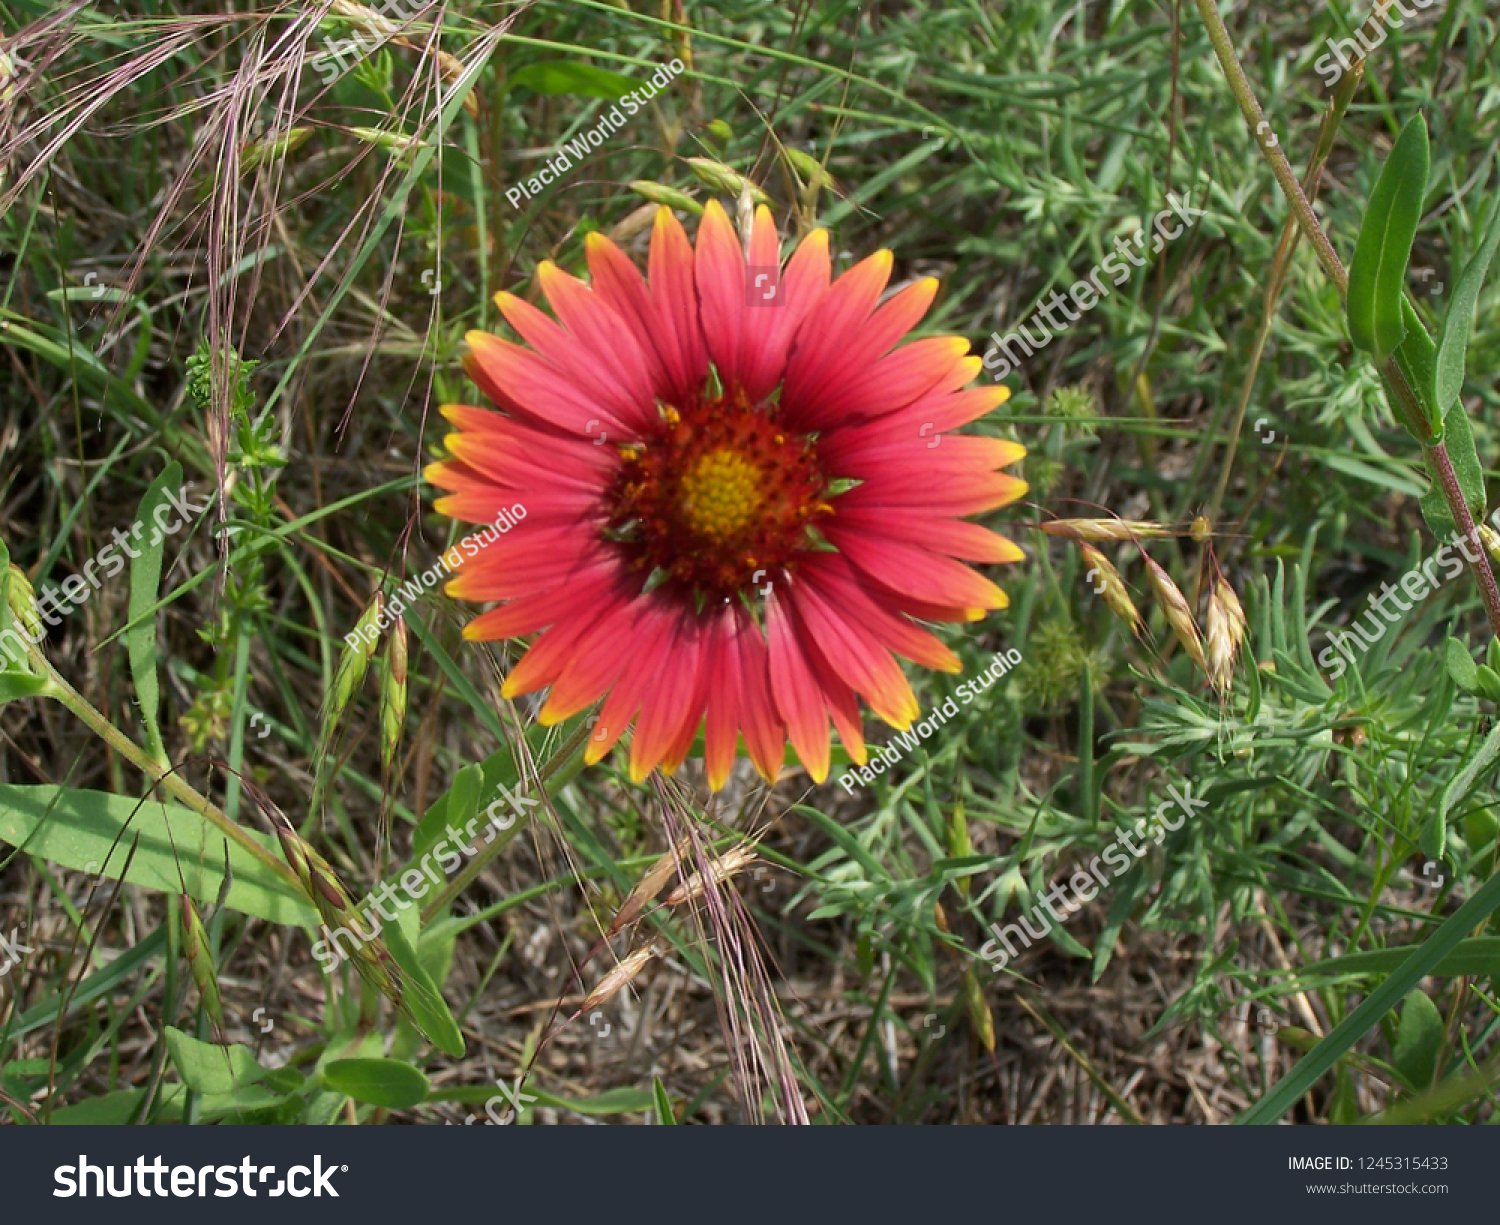 Gaillardia pulchella, commonly known as the Indian Blanket flower.  It is a wildflower found in meadows and fields.  Also known as firewheels.  This flower is part of the sunflower family. #1245315433